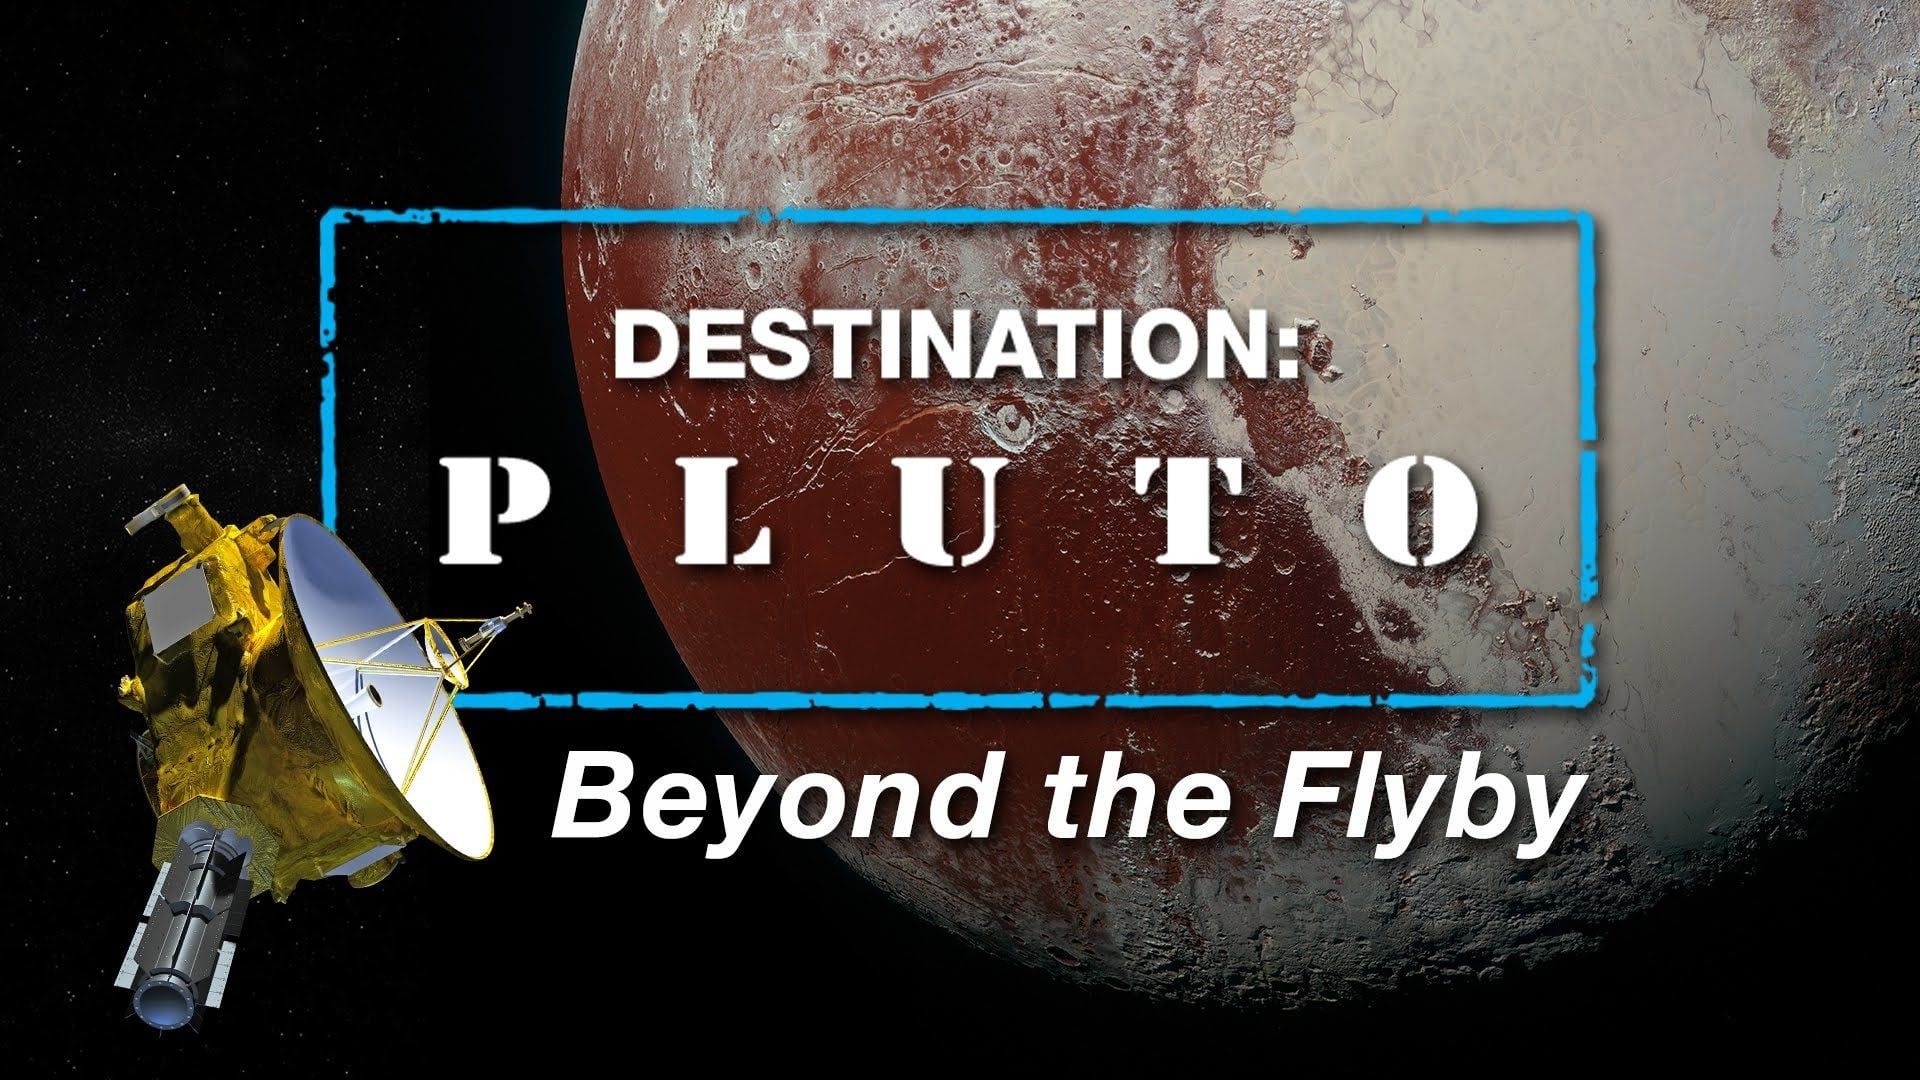 Destination: Pluto Beyond the Flyby background